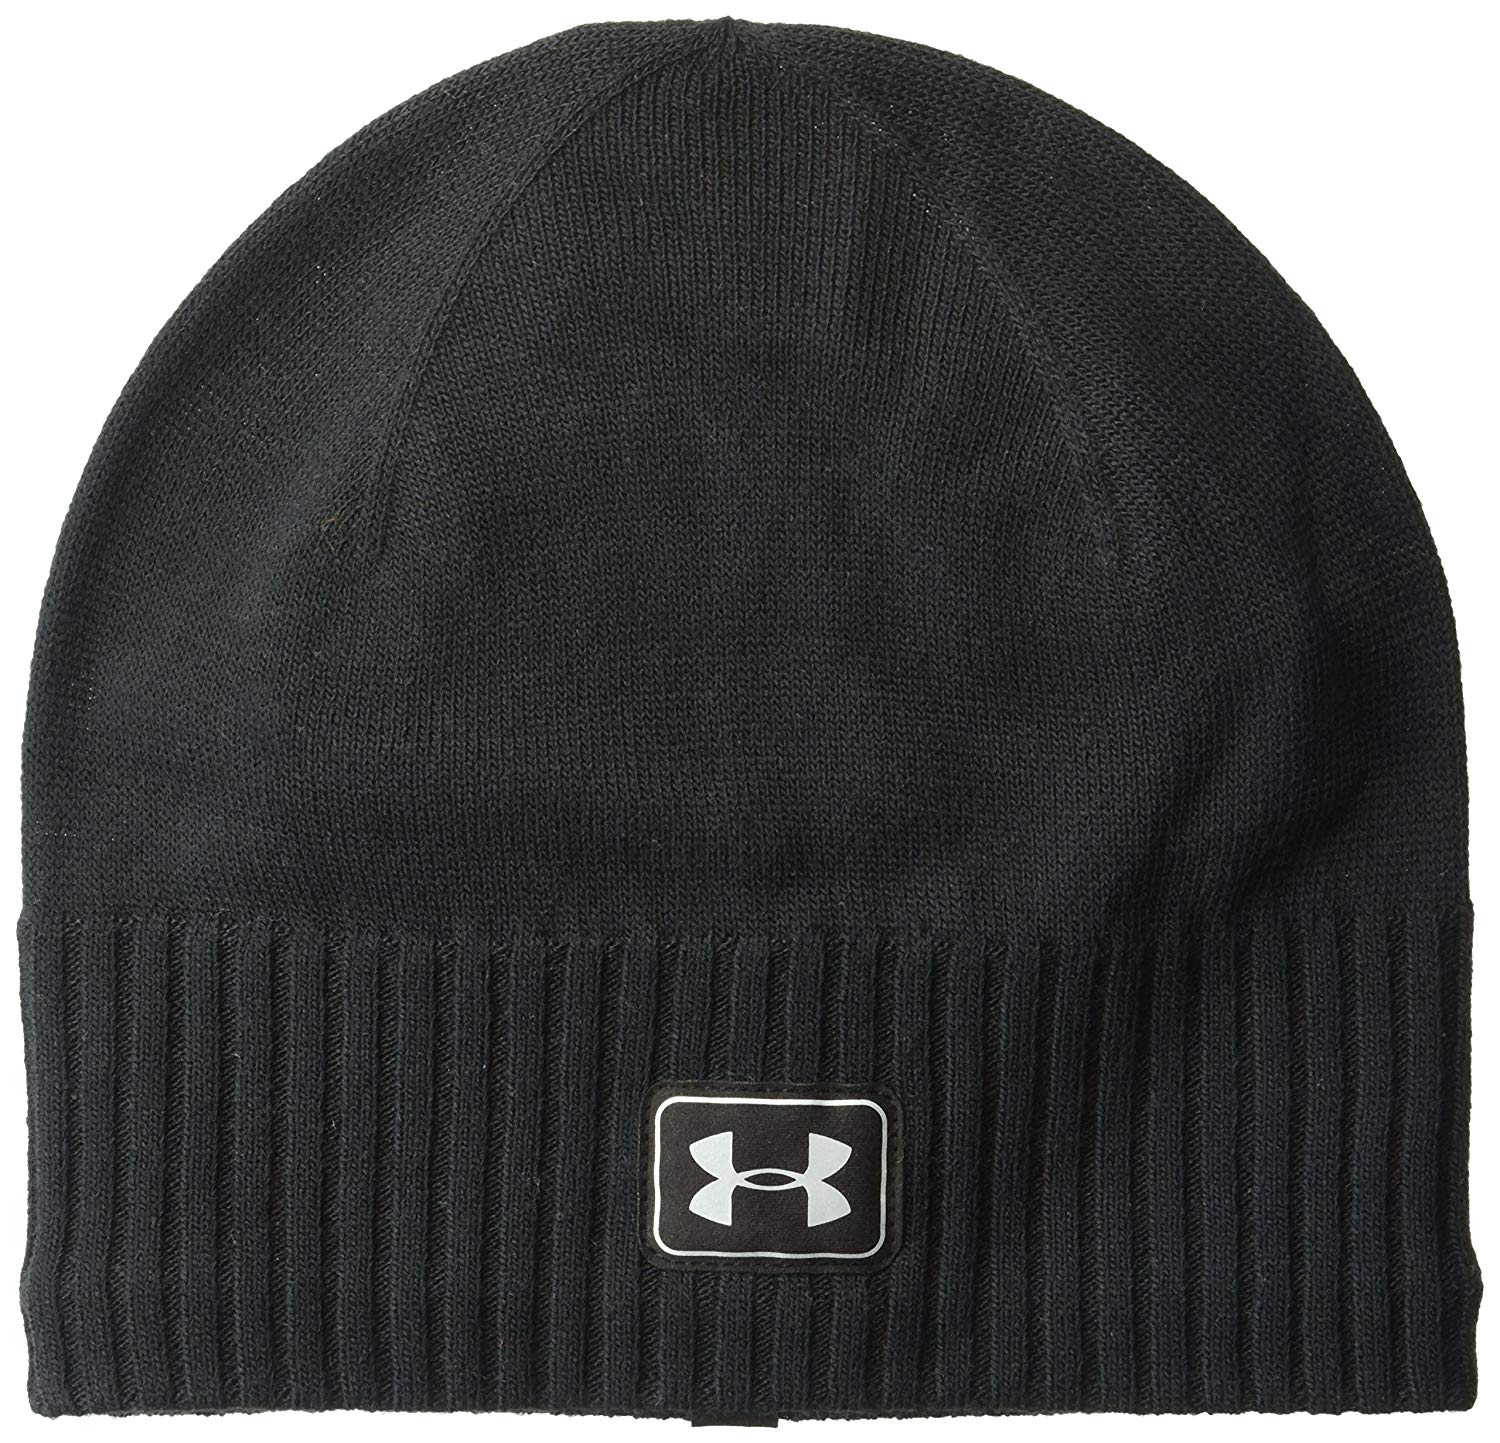 Halo Under Armour Fashion Womens Reflective Knitted Cornice-free Urinal Cap